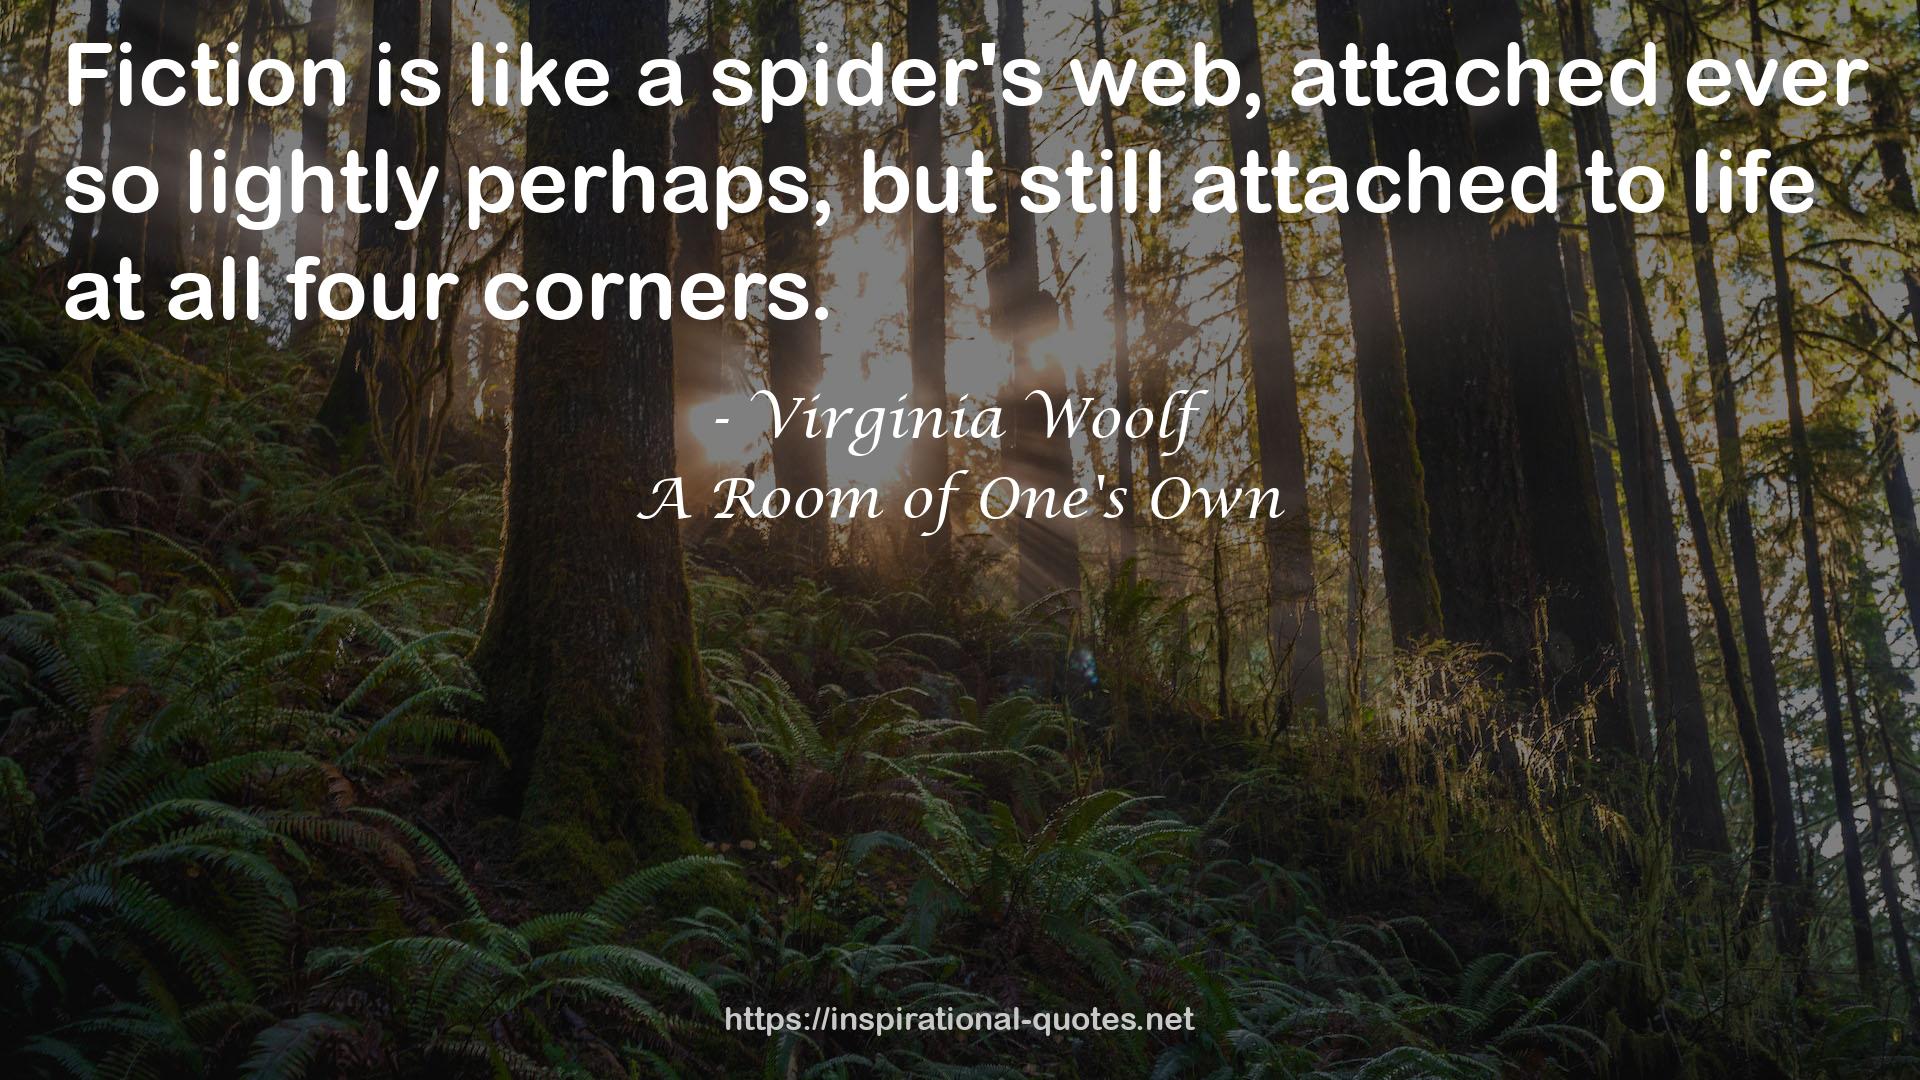 Virginia Woolf QUOTES